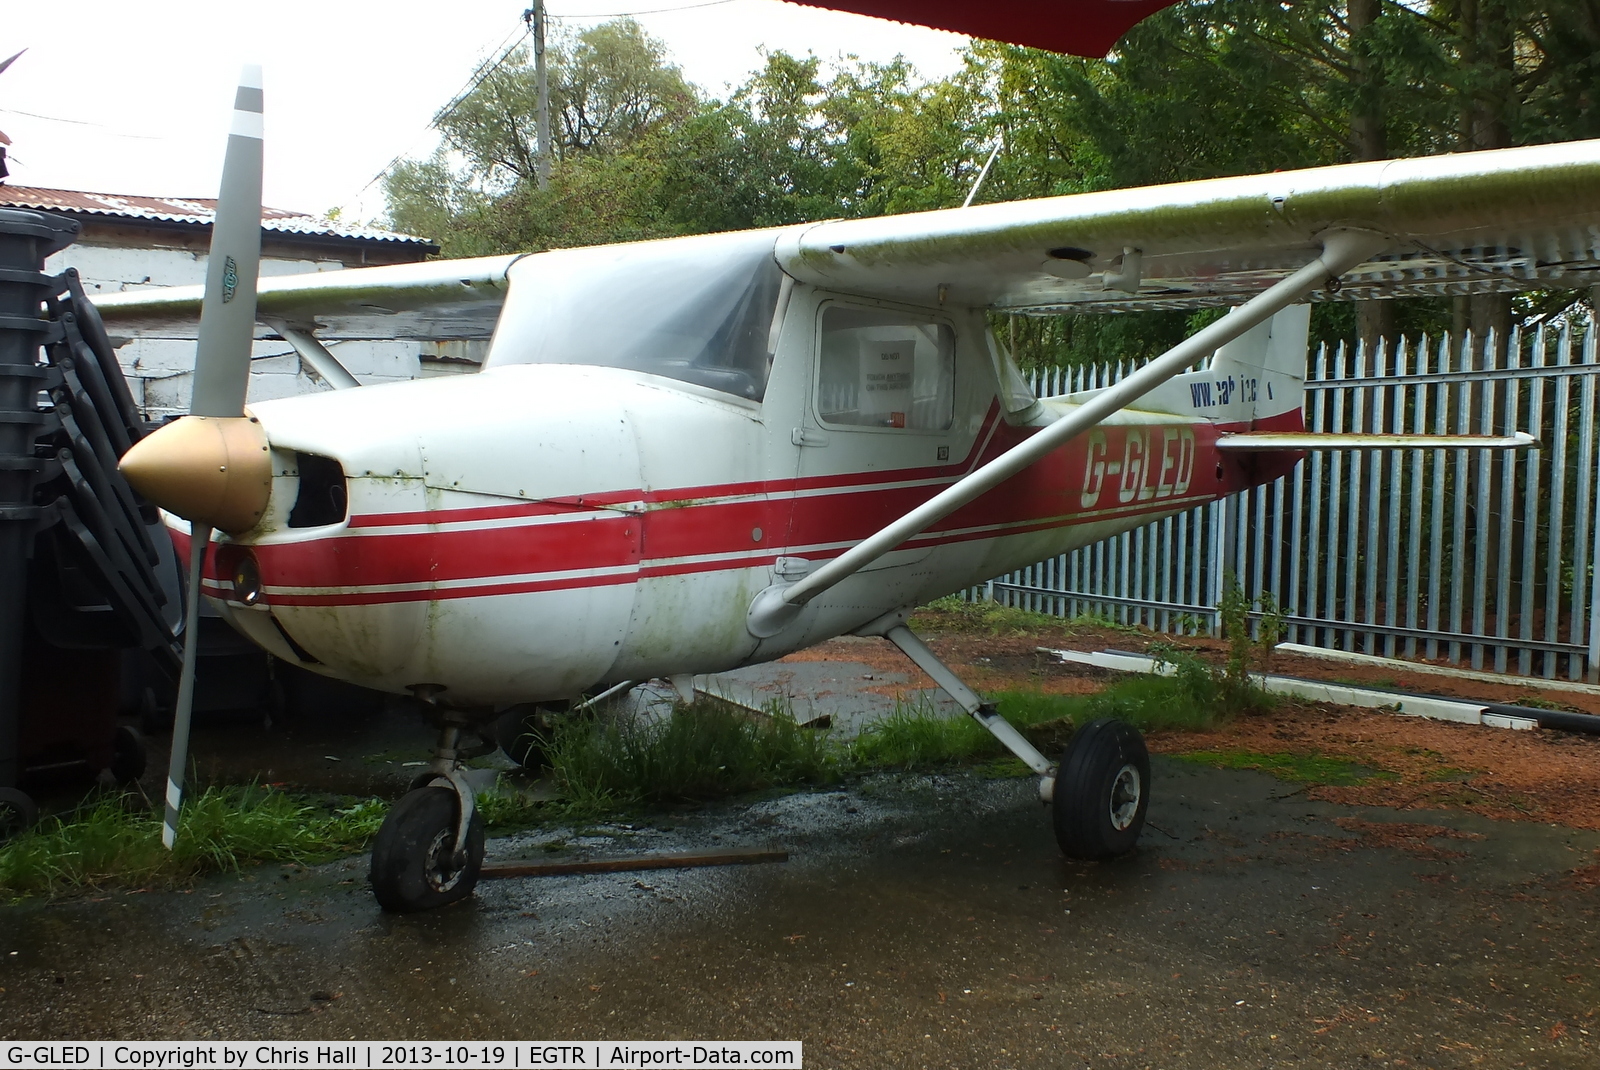 G-GLED, 1975 Cessna 150M C/N 150-76673, parked in the gap between two hangars